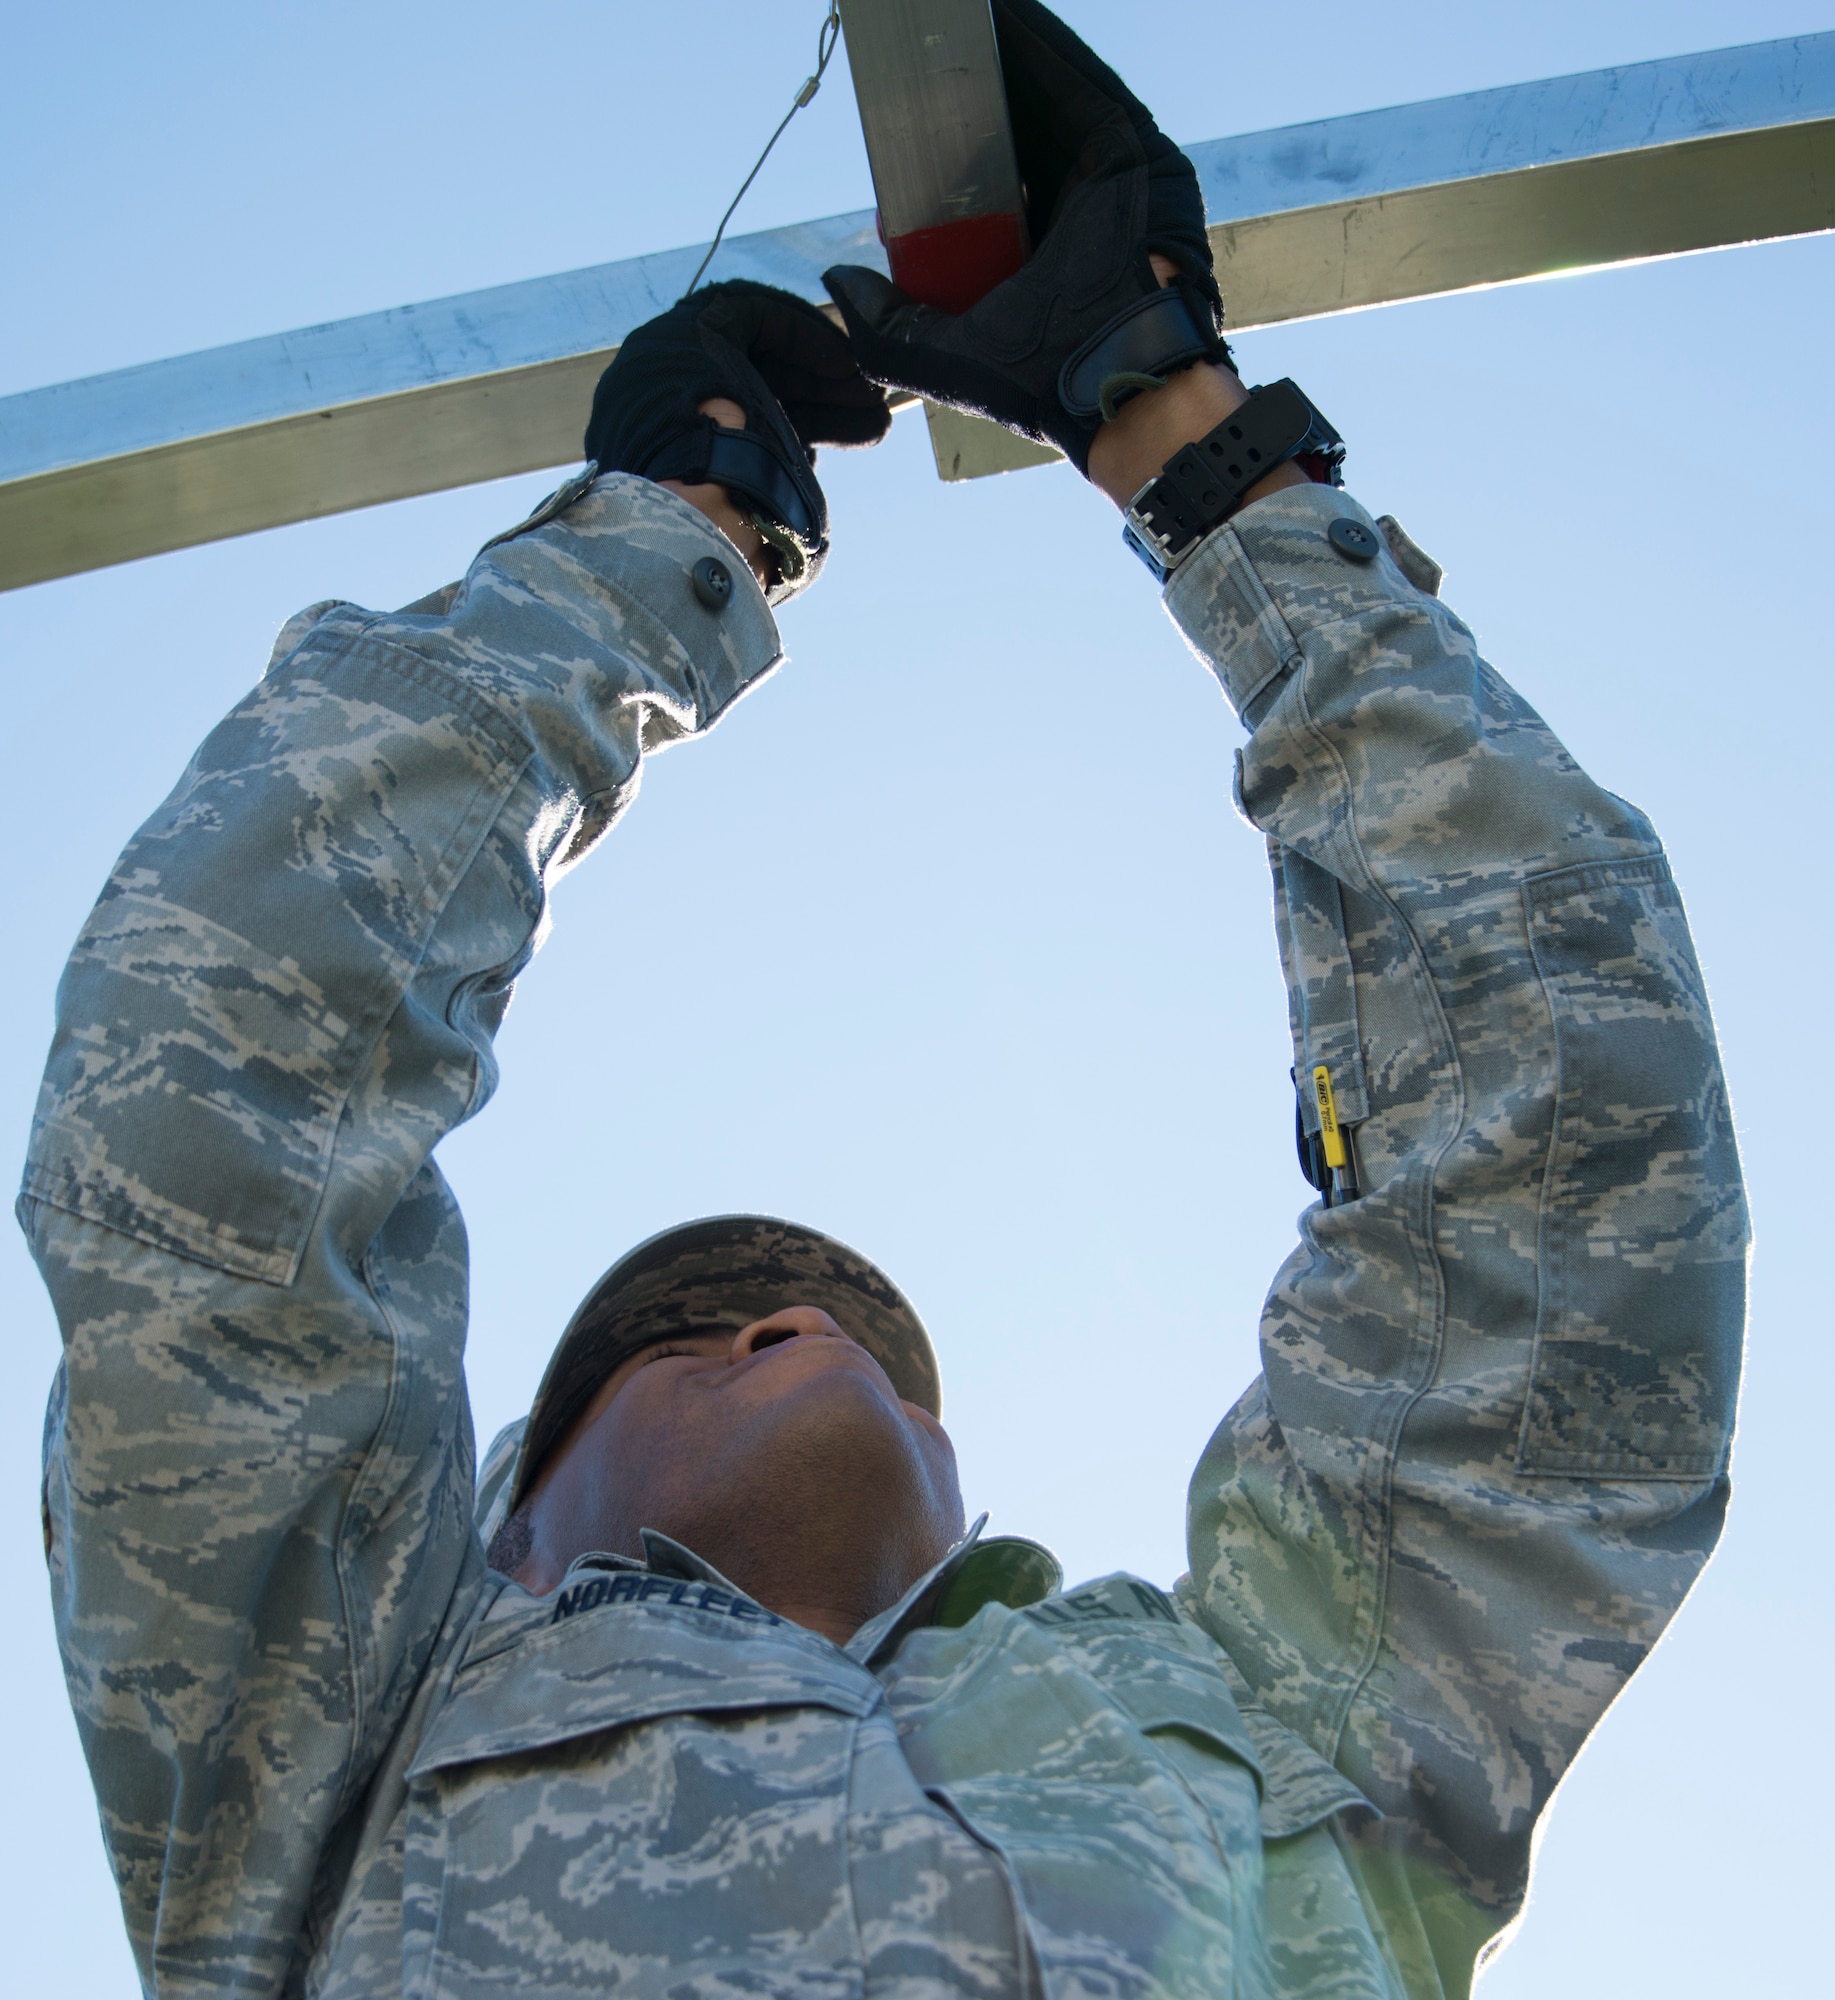 Senior Airman Edward Norfleet, 919th Special Operations Force Support Squadron, inserts a pin to hold a beam in place during small shelter system training at Duke Field, Fla., Sept. 13. The shelter takes six fully trained personnel approximately three and a half hours to complete. The SSS training is part of annual home station readiness training for all members of the squadron. (U.S. Air Force photo/ Tech. Sgt. Jasmin Taylor)  